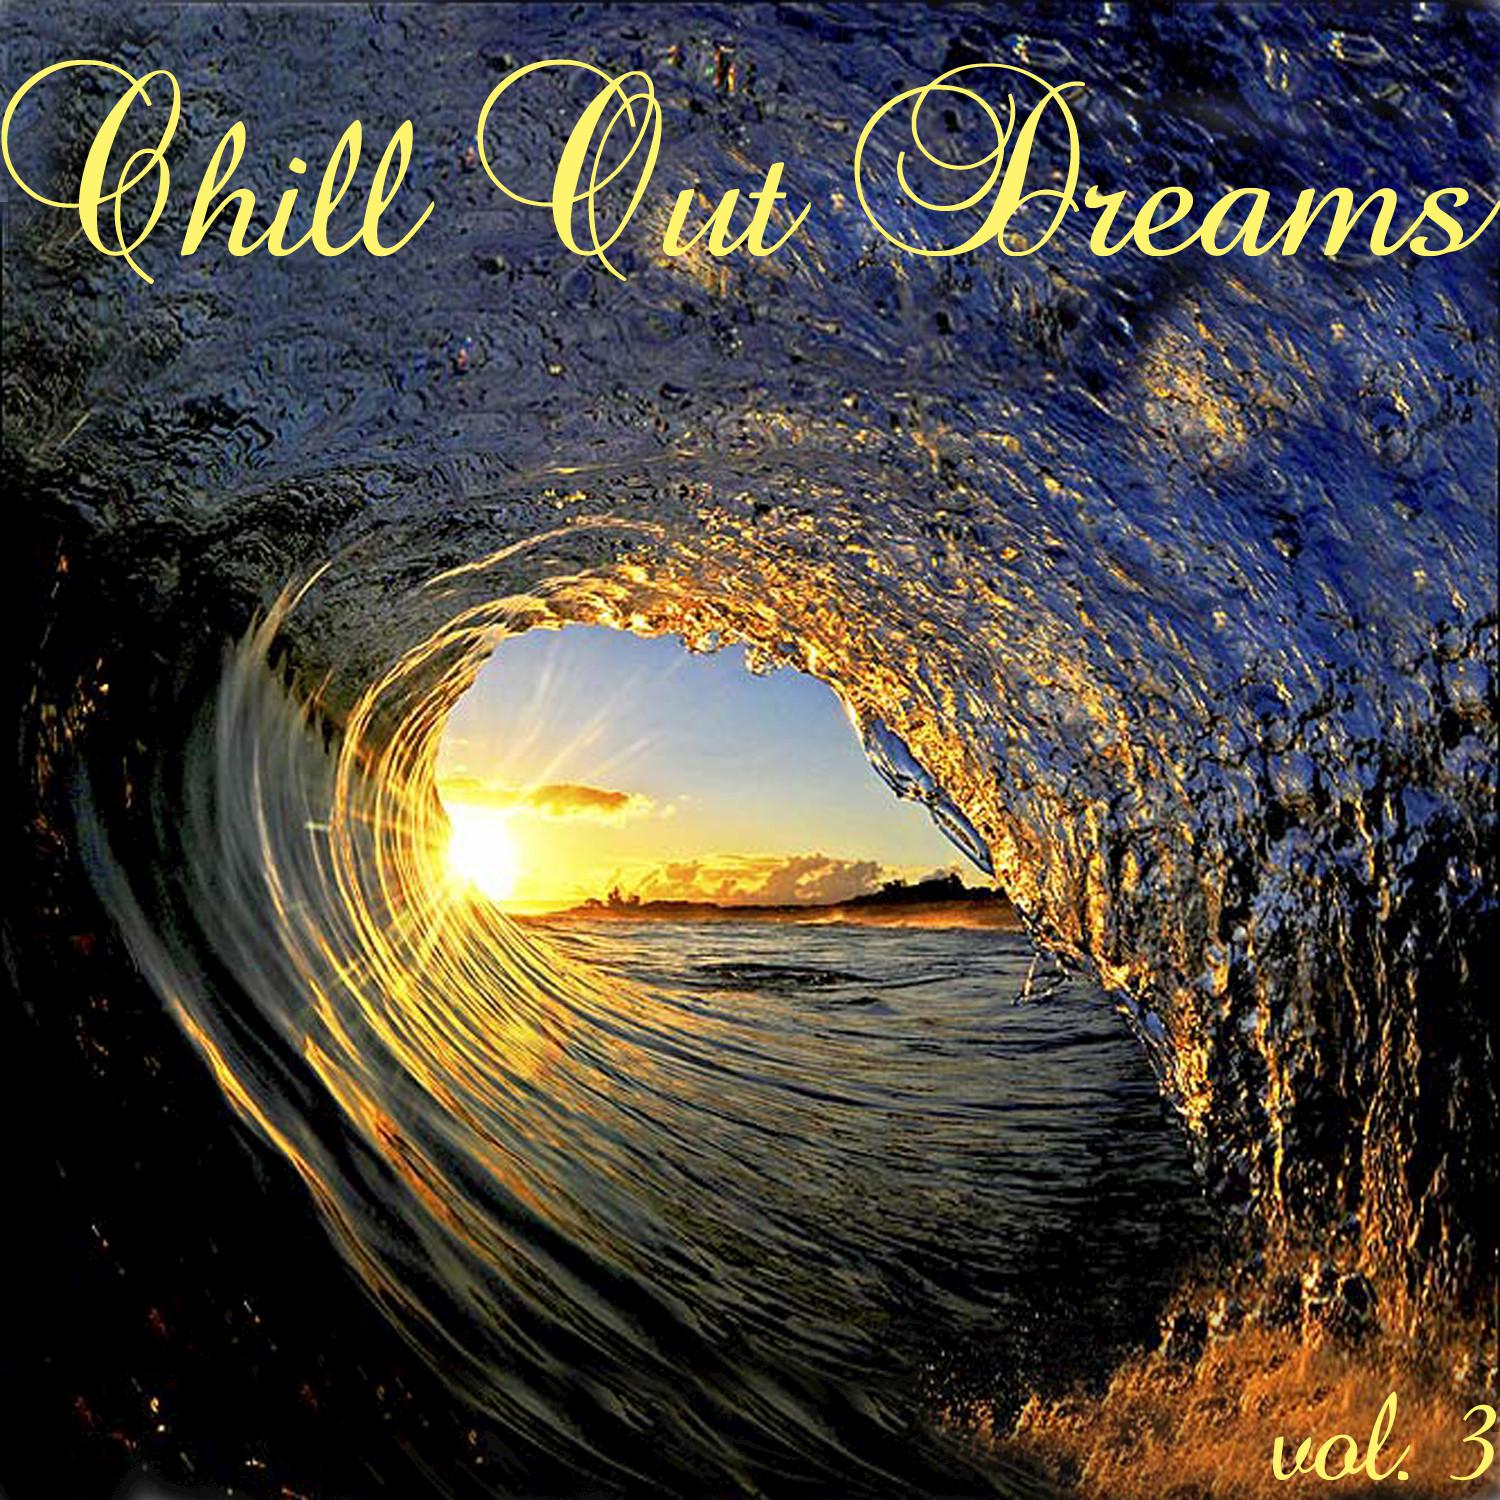 Chill Out Dreams 3